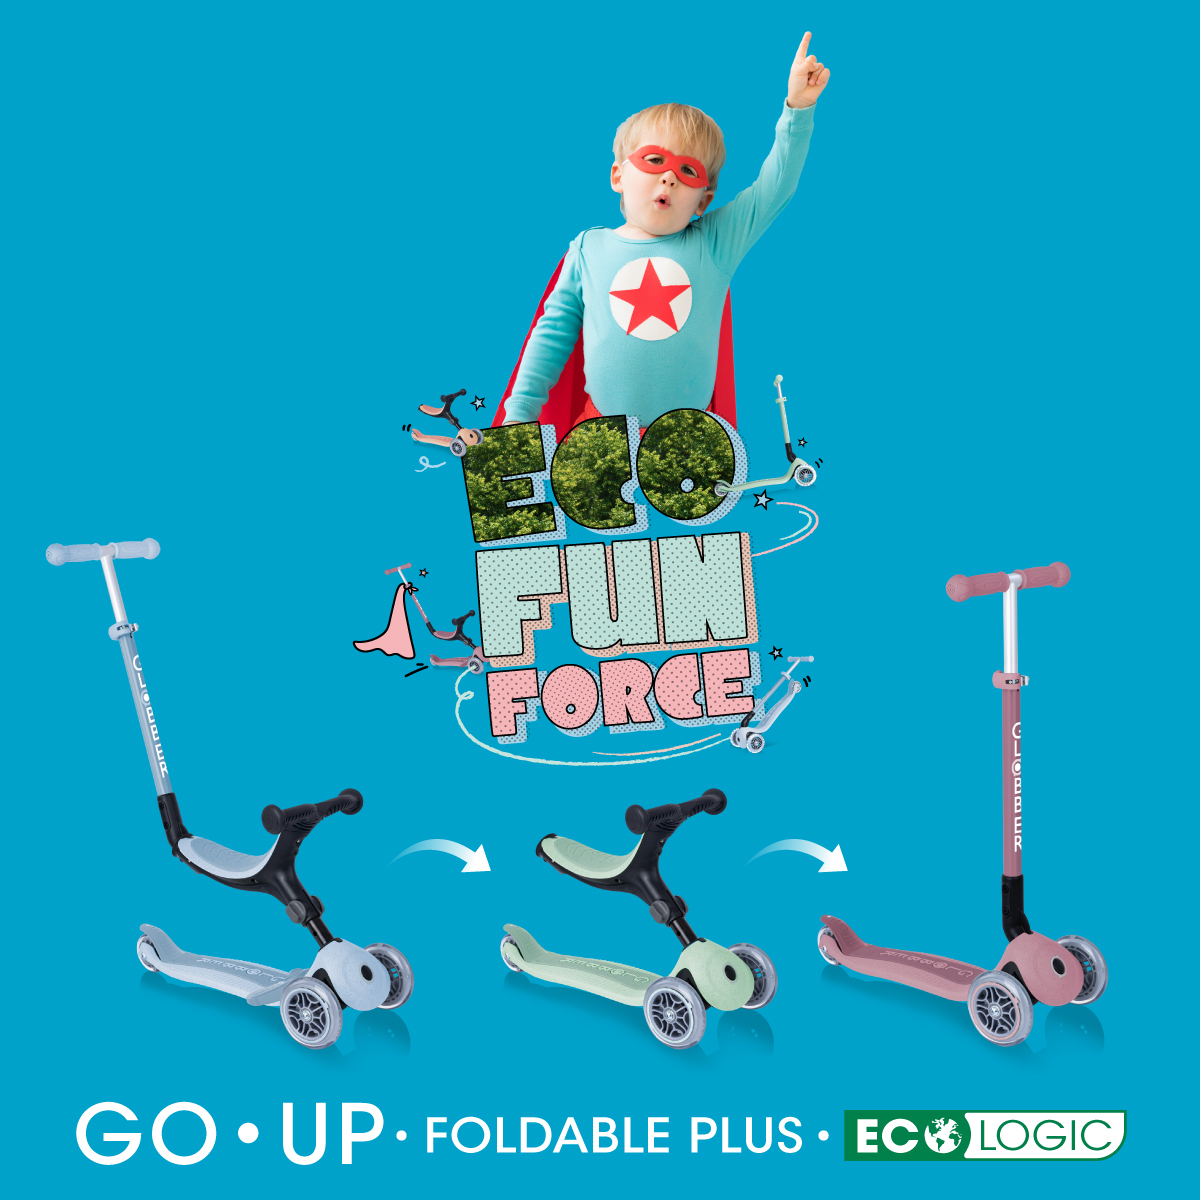 GO UP FOLDABLE PLUS ECOLOGIC scooter with seat for kids - sustainable scooter